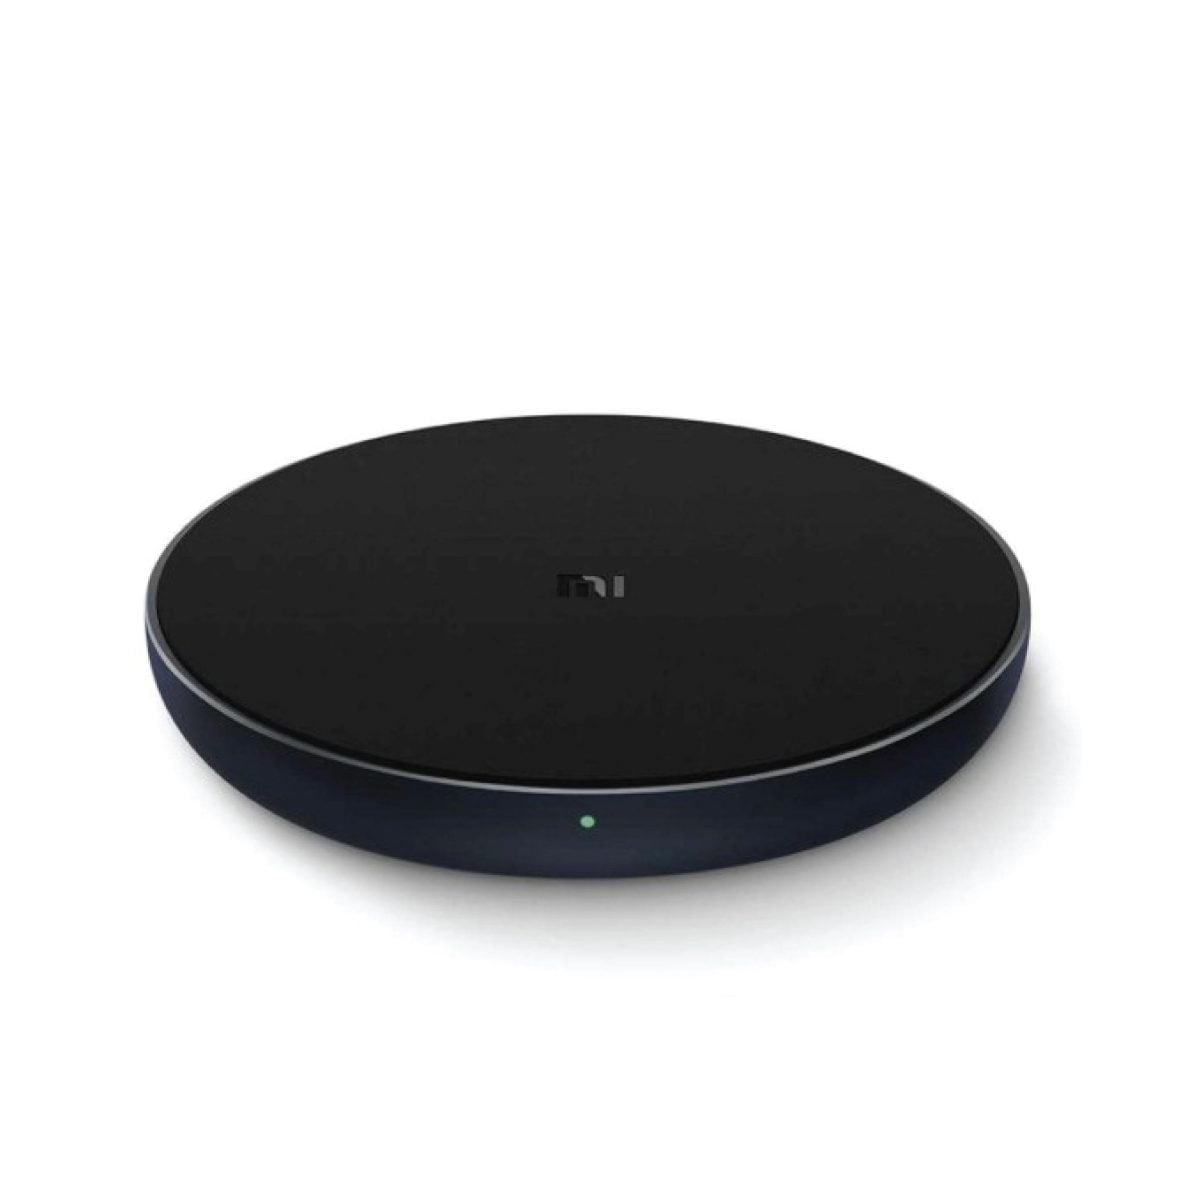 Charger 01 Scaled Xiaomi &Amp;Lt;H1&Amp;Gt;Original Xiaomi Qi Wireless Charger 10W Max Fast Wireless Charging Pad&Amp;Lt;/H1&Amp;Gt; Https://Youtu.be/Qy_Npulepve Charging Pad Mi Wireless Charging Pad